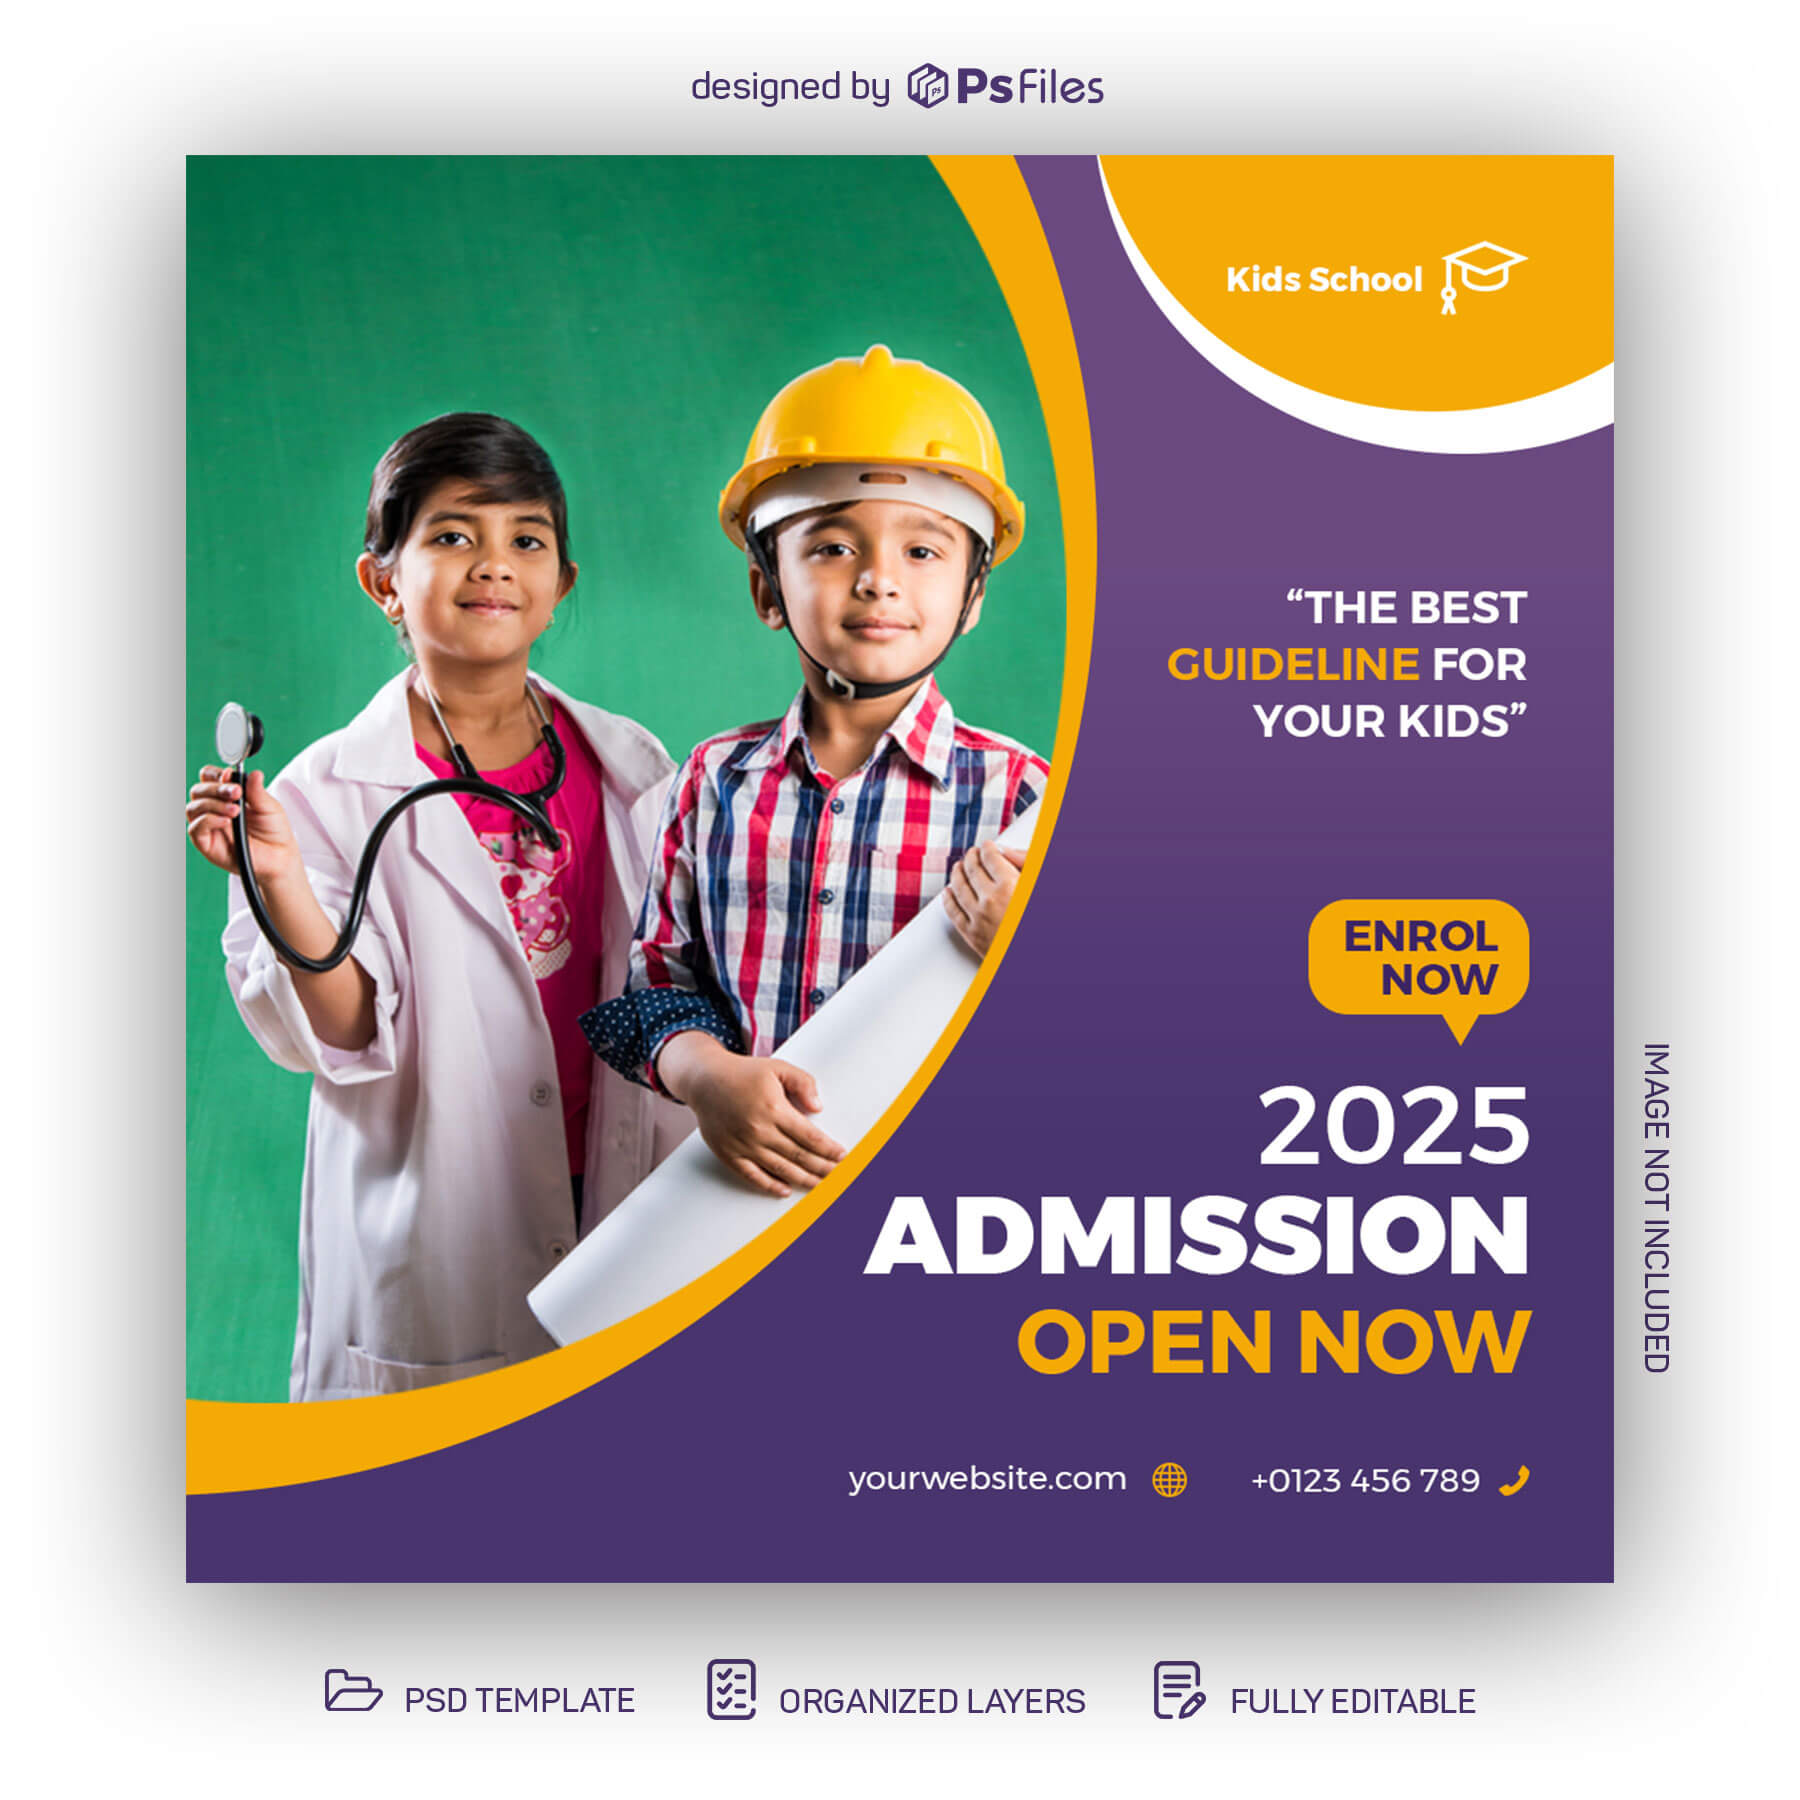 Free School Admission Open Social Post Design PSD Template